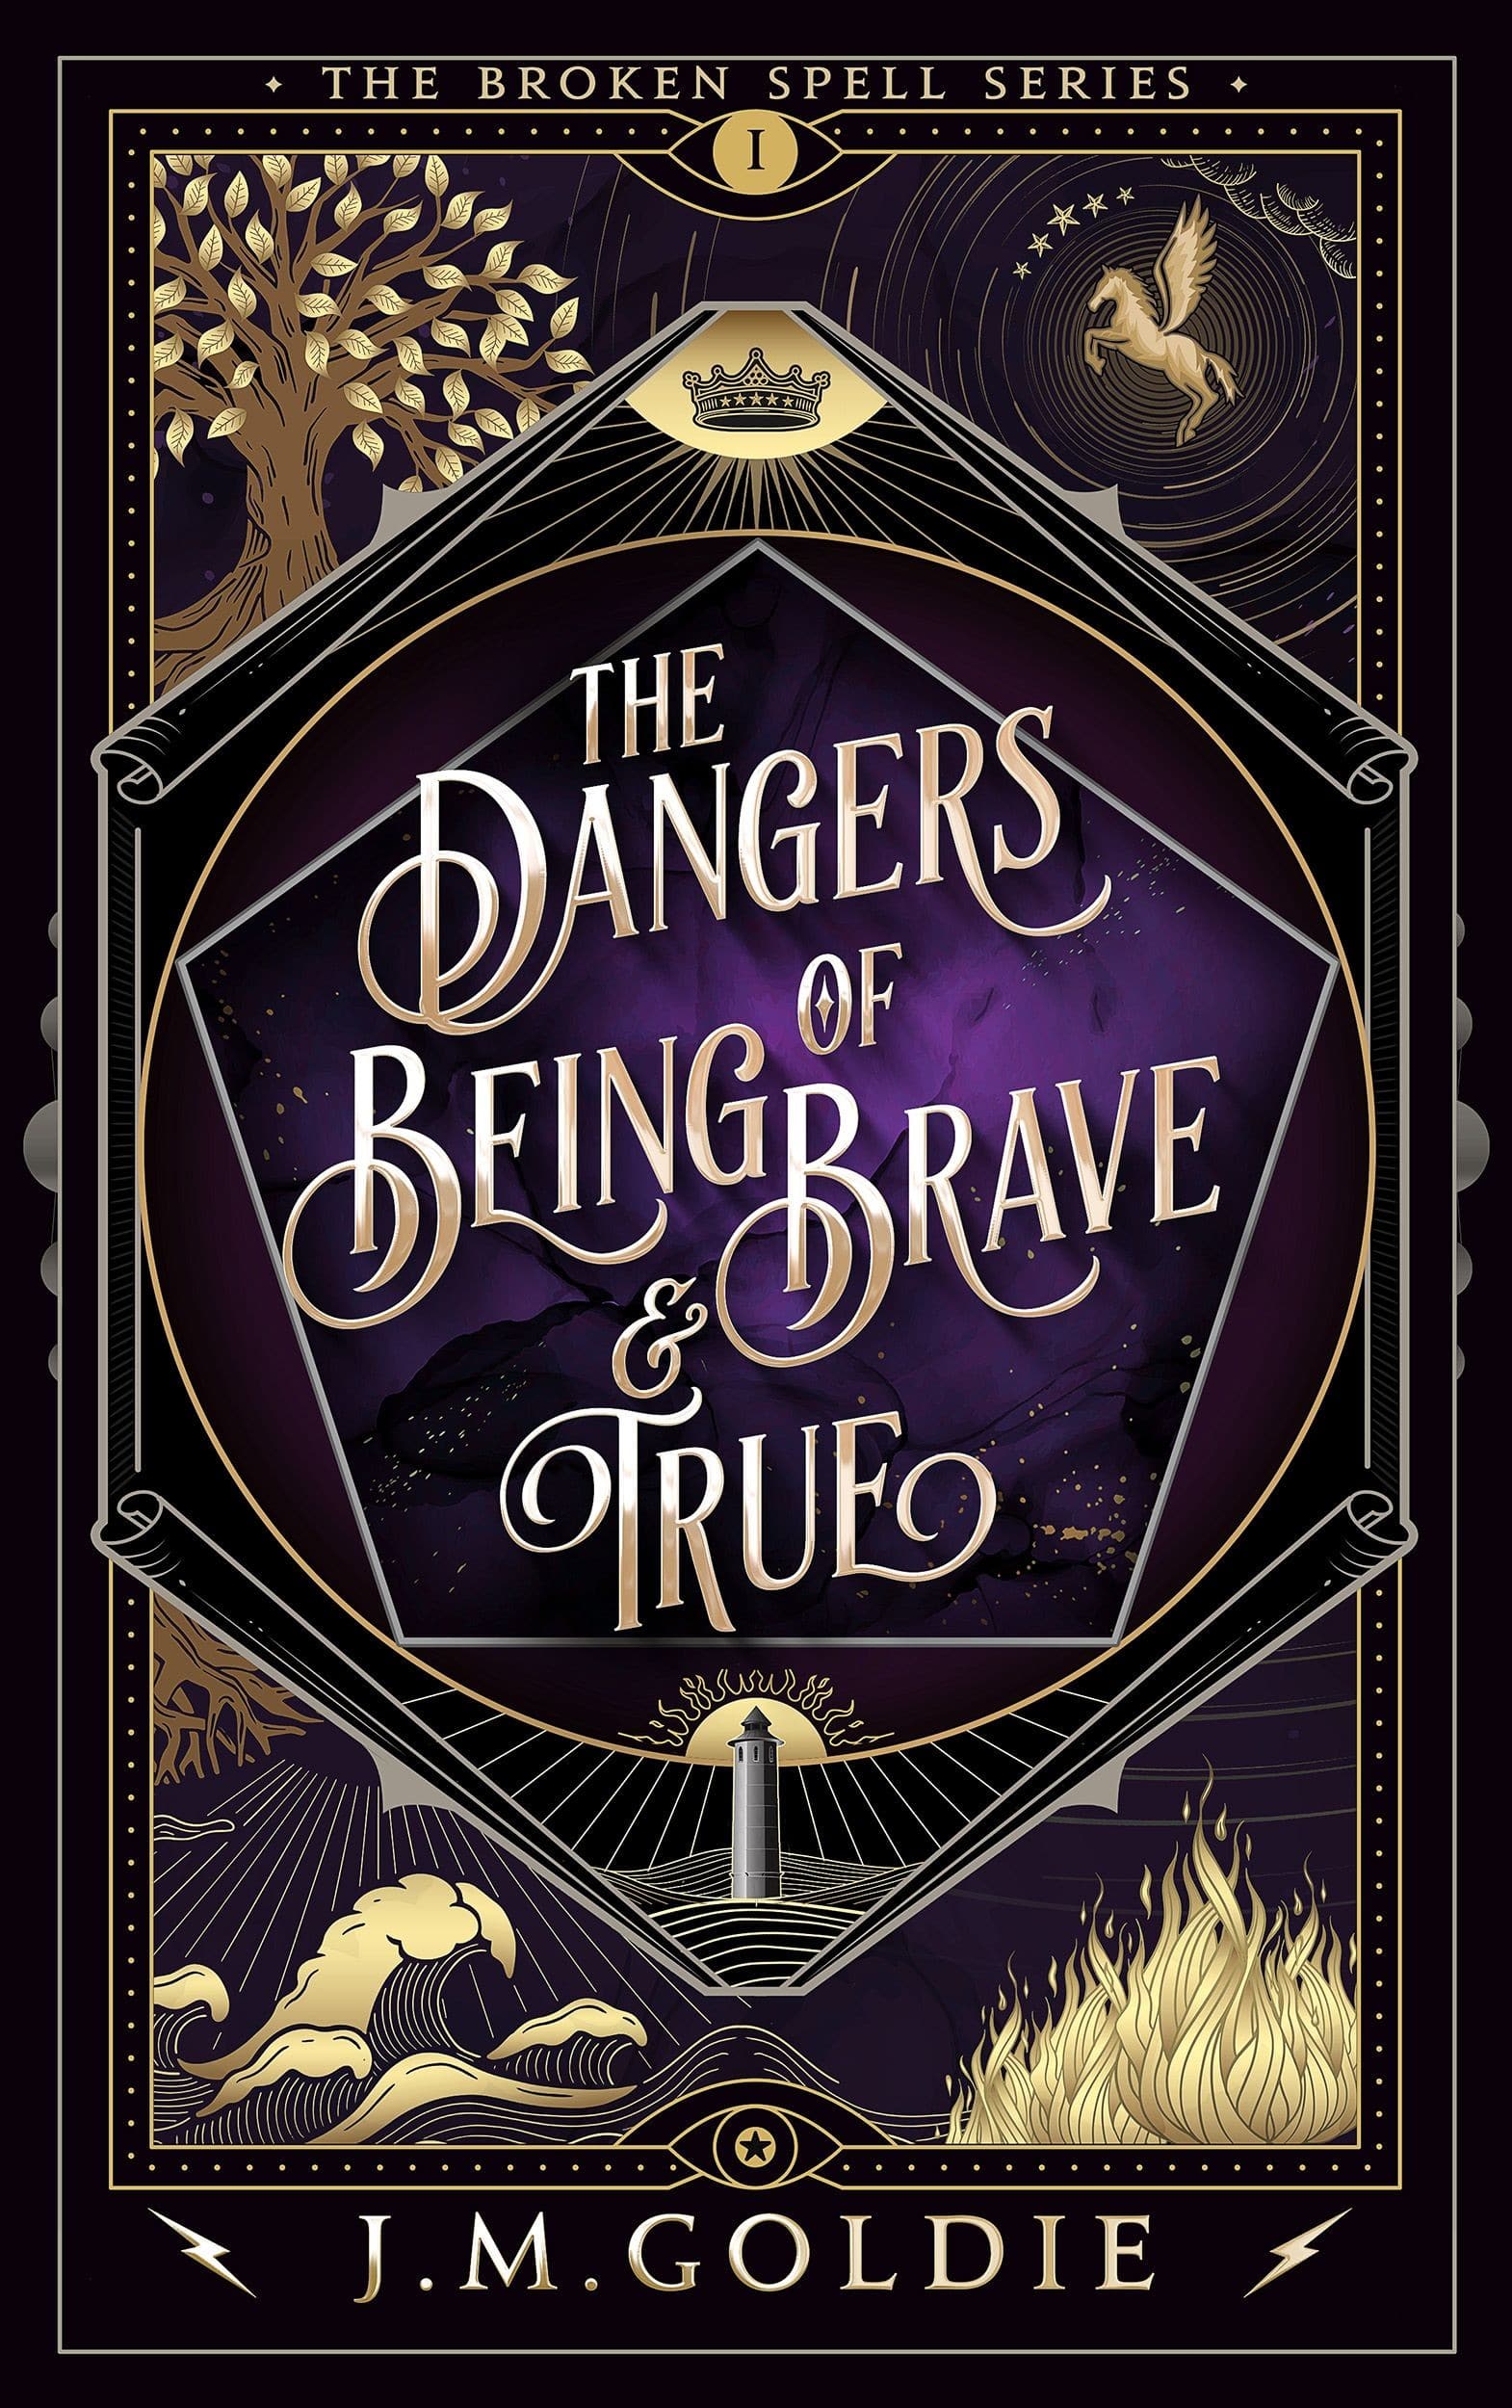 Book cover of The Dangers of Being Brave & True by J.M. Goldie Young adult fiction epic fantasy book in a young adult fantasy series The Broken Spell